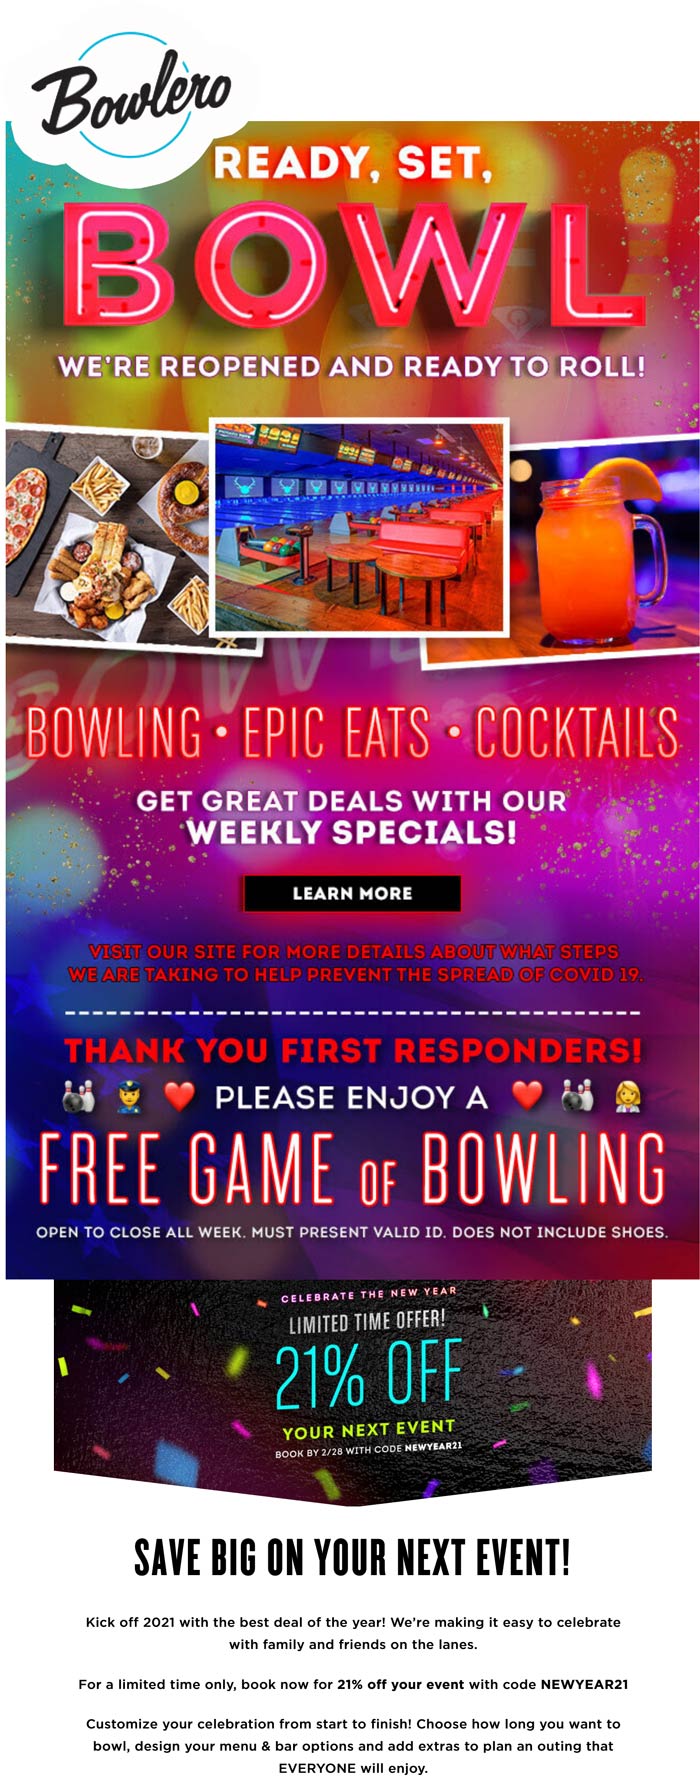 Bowlero stores Coupon  First responders enjoy a free game of bowling at local Bowlero locations, also everyone gets 21% off via promo code NEWYEAR21 #bowlero 